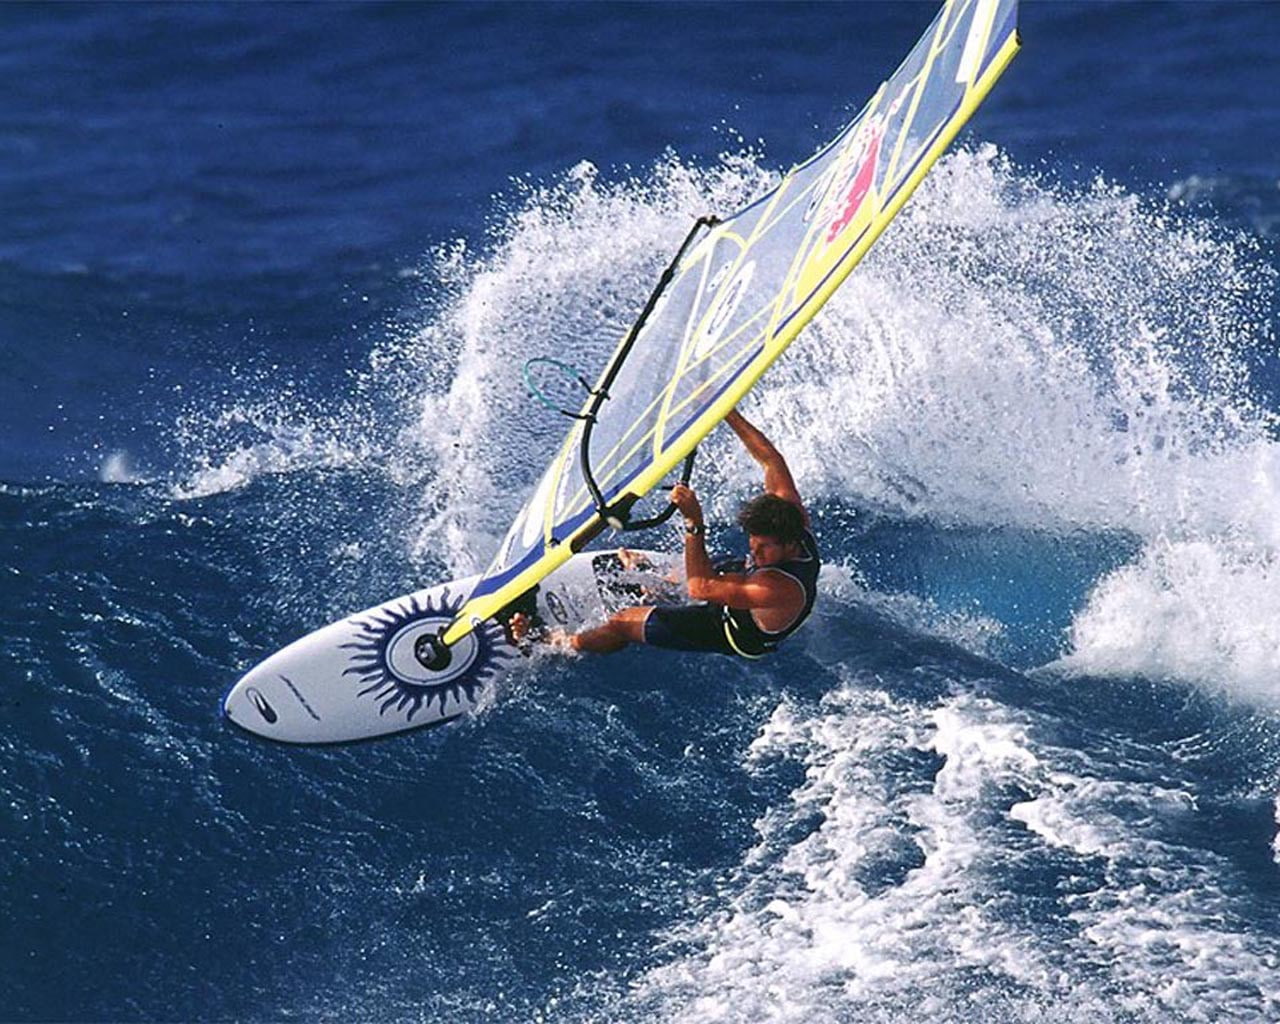 windsurfing, sport, motion, water, aquatic sport, one person